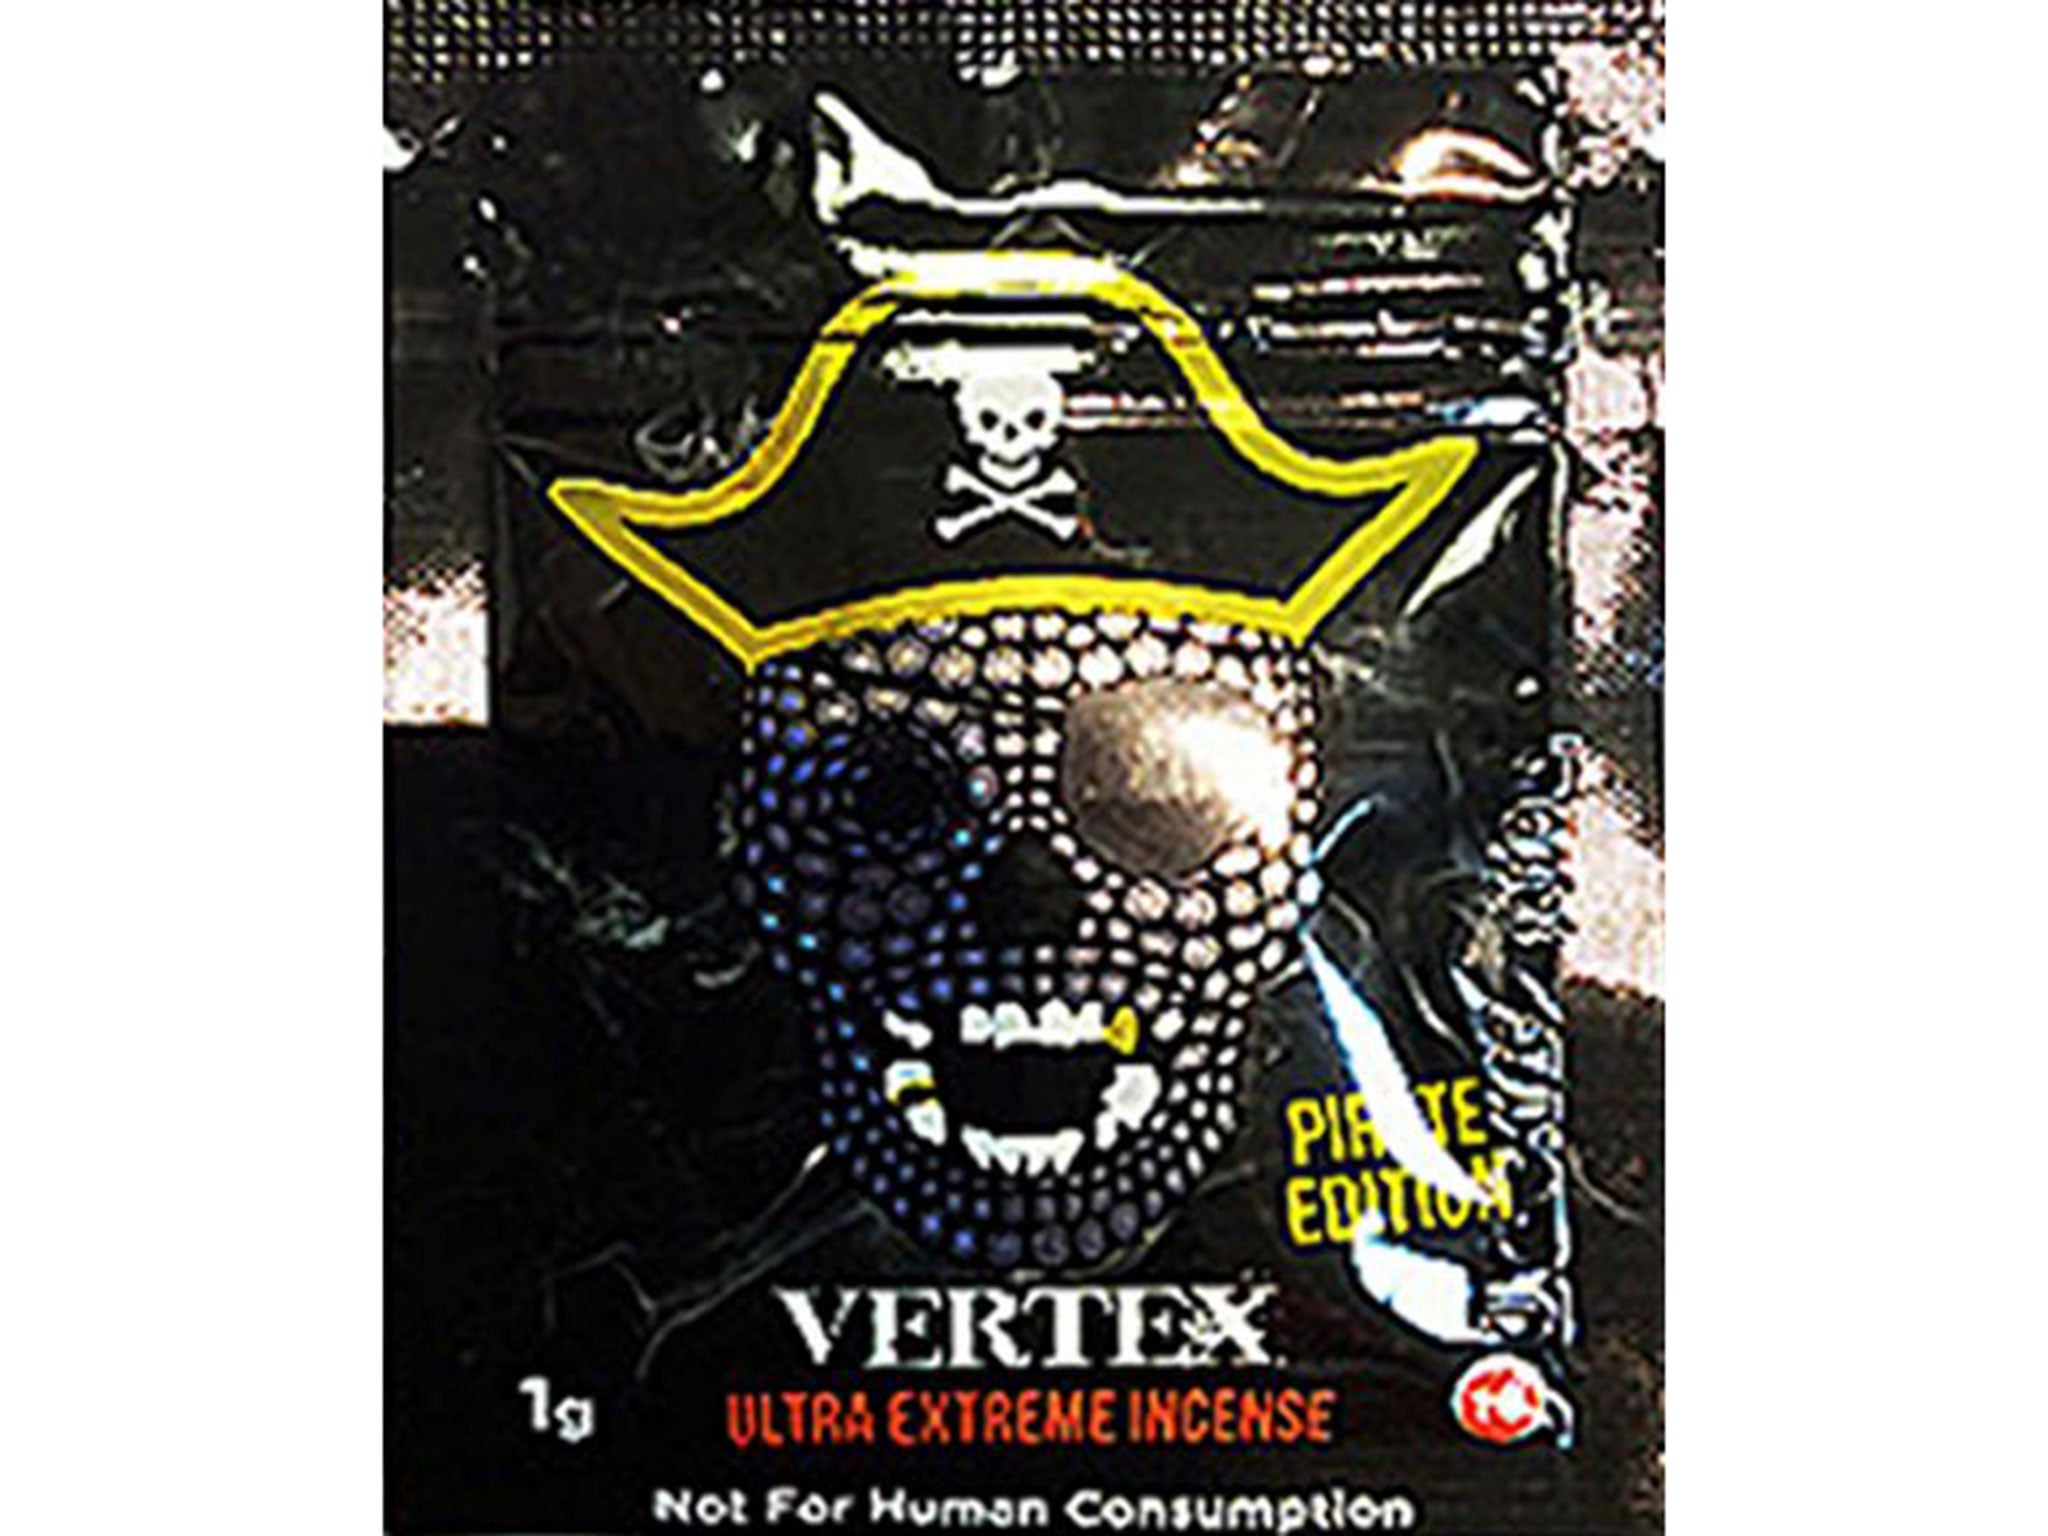 Undated handout photo issued by Greater Manchester Police of Vertex, a legal high which police have issued a warning about after a number of people were hospitalised